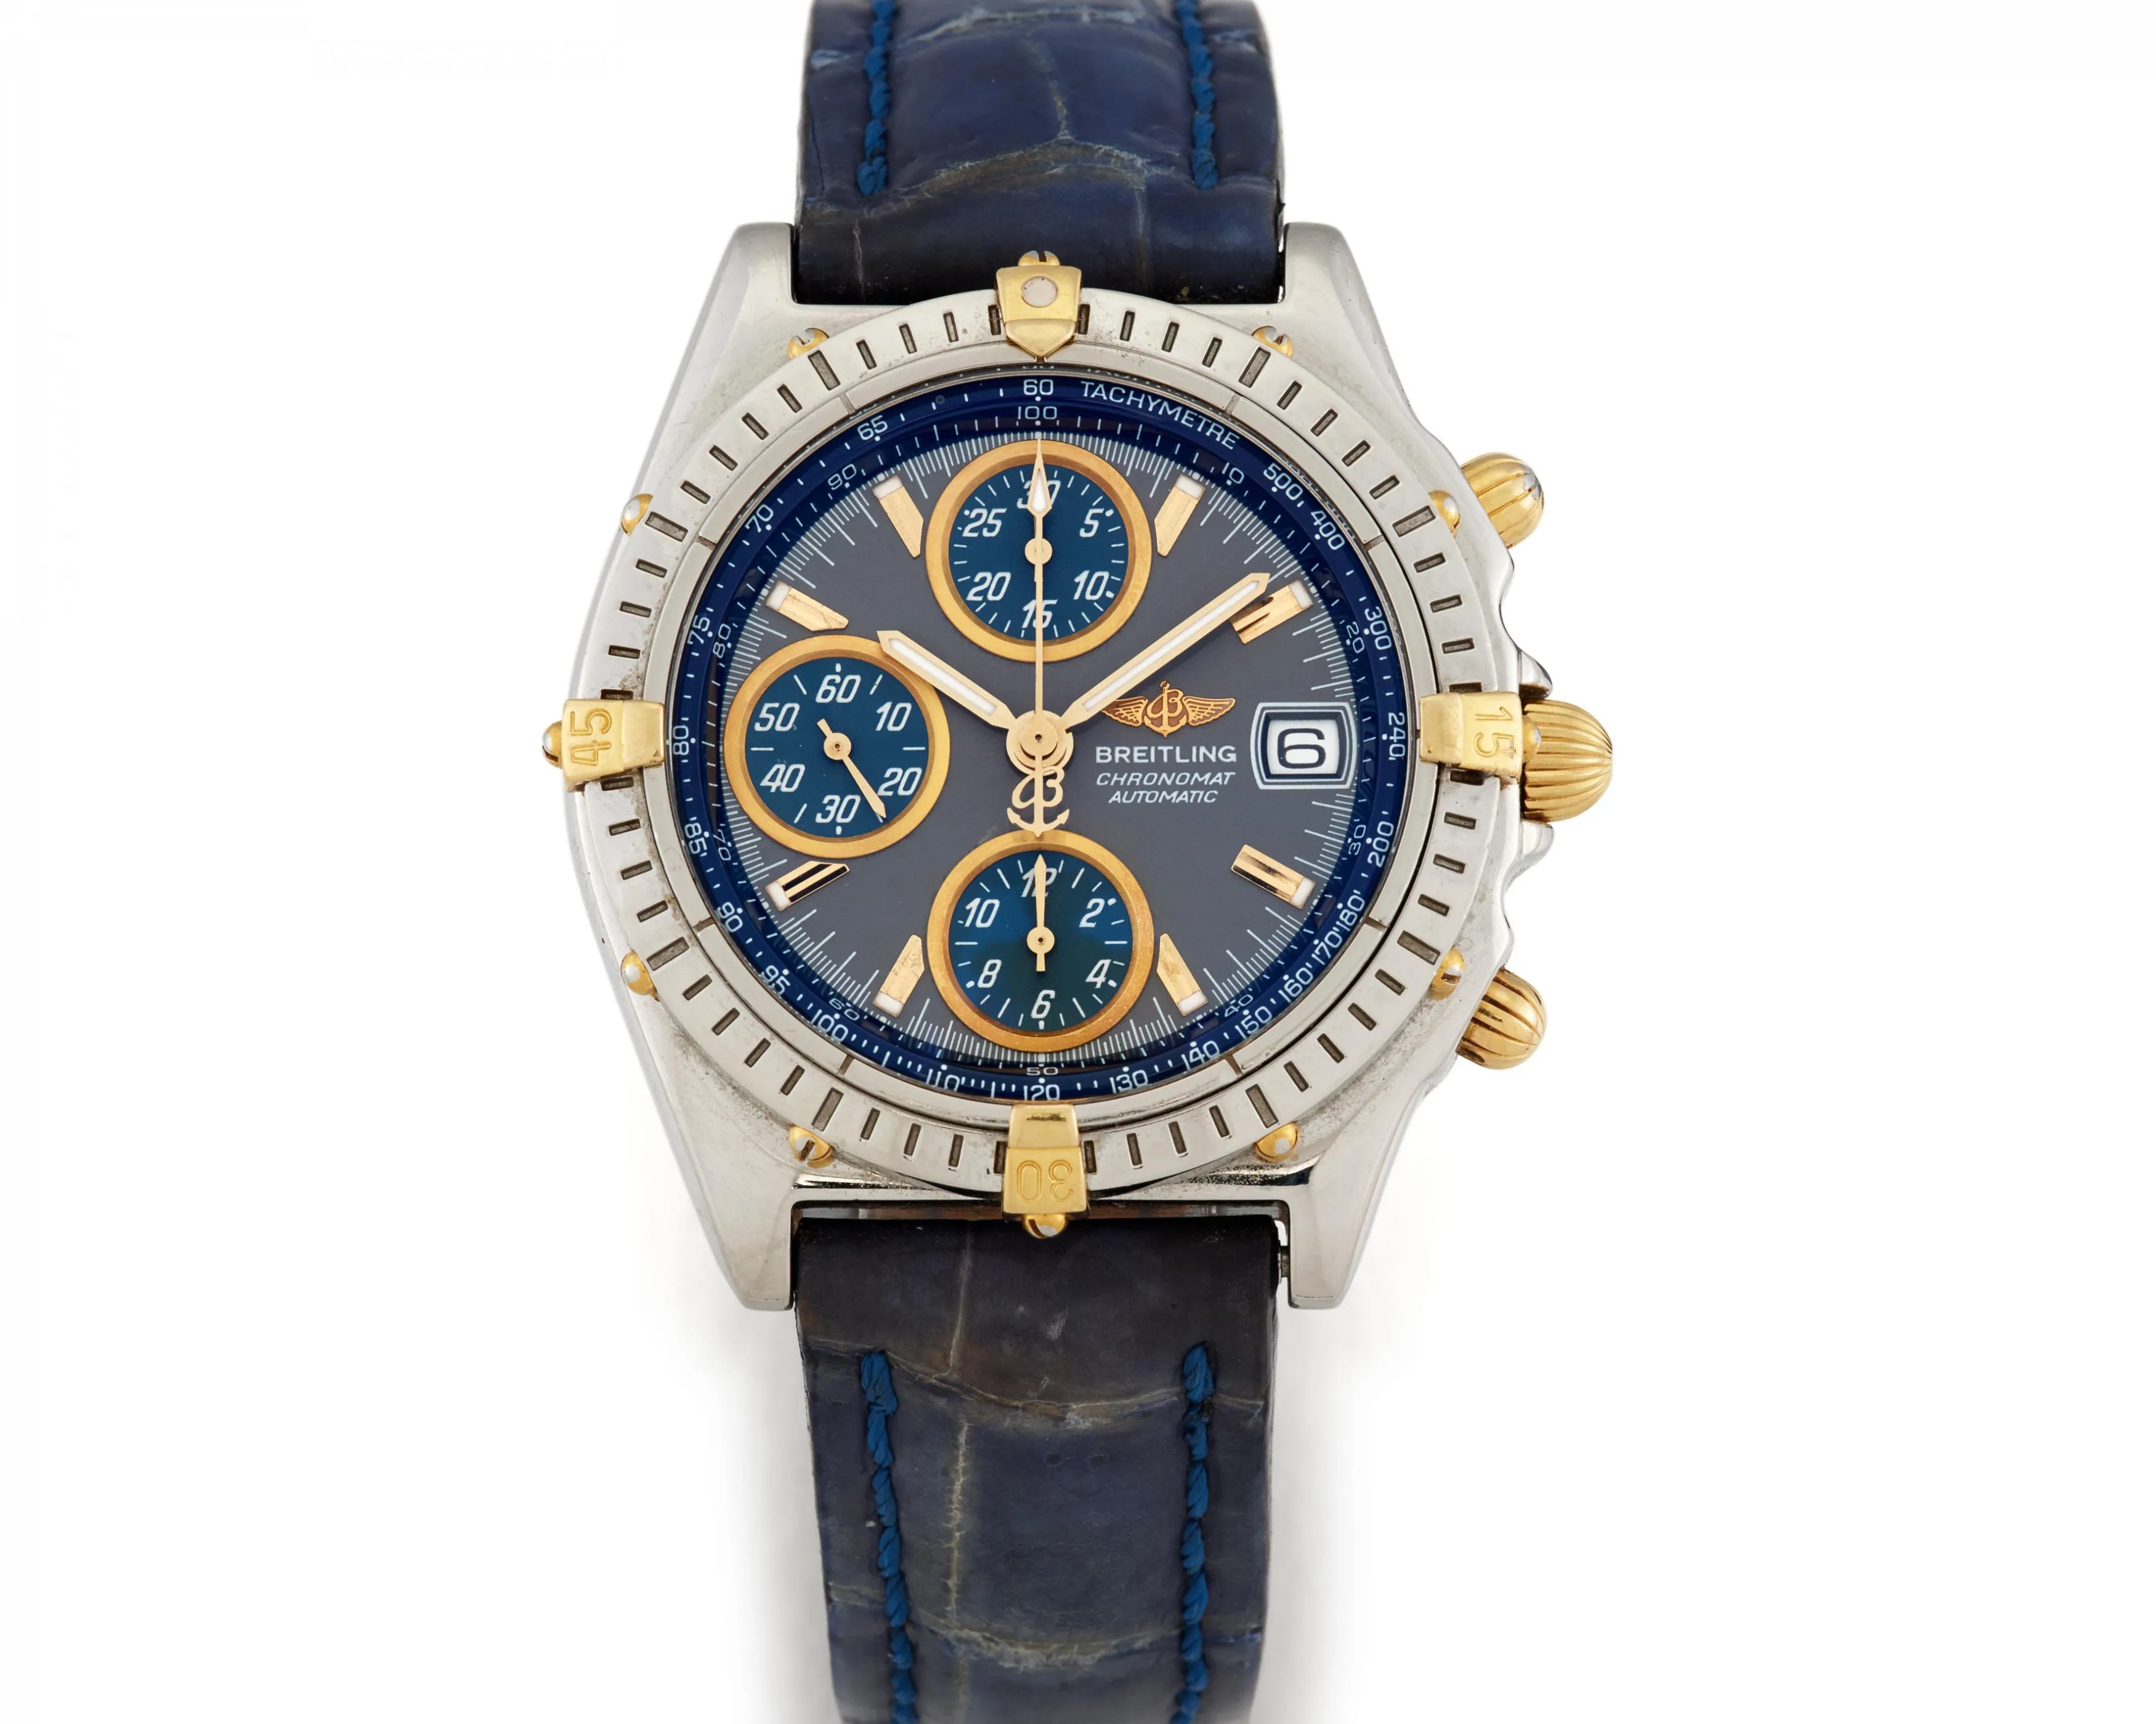 Breitling Chronomat B13050.1 40mm Yellow gold and stainless steel Blue